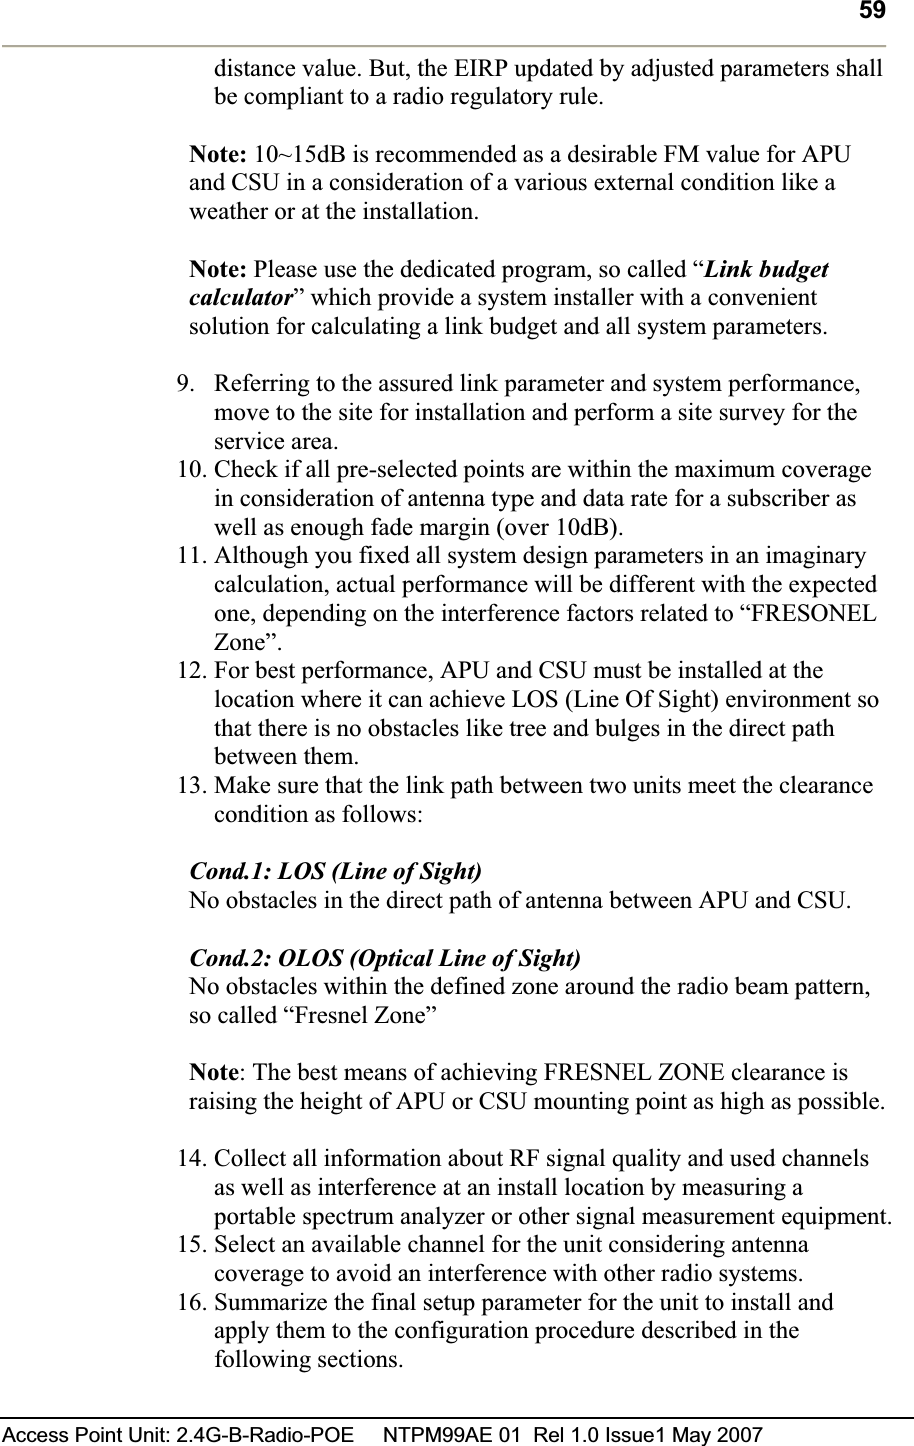 59Access Point Unit: 2.4G-B-Radio-POE     NTPM99AE 01  Rel 1.0 Issue1 May 2007 distance value. But, the EIRP updated by adjusted parameters shall be compliant to a radio regulatory rule.  Note: 10~15dB is recommended as a desirable FM value for APU and CSU in a consideration of a various external condition like a weather or at the installation.Note: Please use the dedicated program, so called “Link budget calculator” which provide a system installer with a convenient solution for calculating a link budget and all system parameters.  9. Referring to the assured link parameter and system performance, move to the site for installation and perform a site survey for the service area.  10. Check if all pre-selected points are within the maximum coverage in consideration of antenna type and data rate for a subscriber as well as enough fade margin (over 10dB).  11. Although you fixed all system design parameters in an imaginary calculation, actual performance will be different with the expected one, depending on the interference factors related to “FRESONEL Zone”.12. For best performance, APU and CSU must be installed at the location where it can achieve LOS (Line Of Sight) environment so that there is no obstacles like tree and bulges in the direct path between them.13. Make sure that the link path between two units meet the clearance condition as follows:Cond.1: LOS (Line of Sight) No obstacles in the direct path of antenna between APU and CSU.Cond.2: OLOS (Optical Line of Sight) No obstacles within the defined zone around the radio beam pattern, so called “Fresnel Zone”Note: The best means of achieving FRESNEL ZONE clearance is raising the height of APU or CSU mounting point as high as possible.14. Collect all information about RF signal quality and used channels as well as interference at an install location by measuring a portable spectrum analyzer or other signal measurement equipment. 15. Select an available channel for the unit considering antenna coverage to avoid an interference with other radio systems.   16. Summarize the final setup parameter for the unit to install and apply them to the configuration procedure described in the following sections.